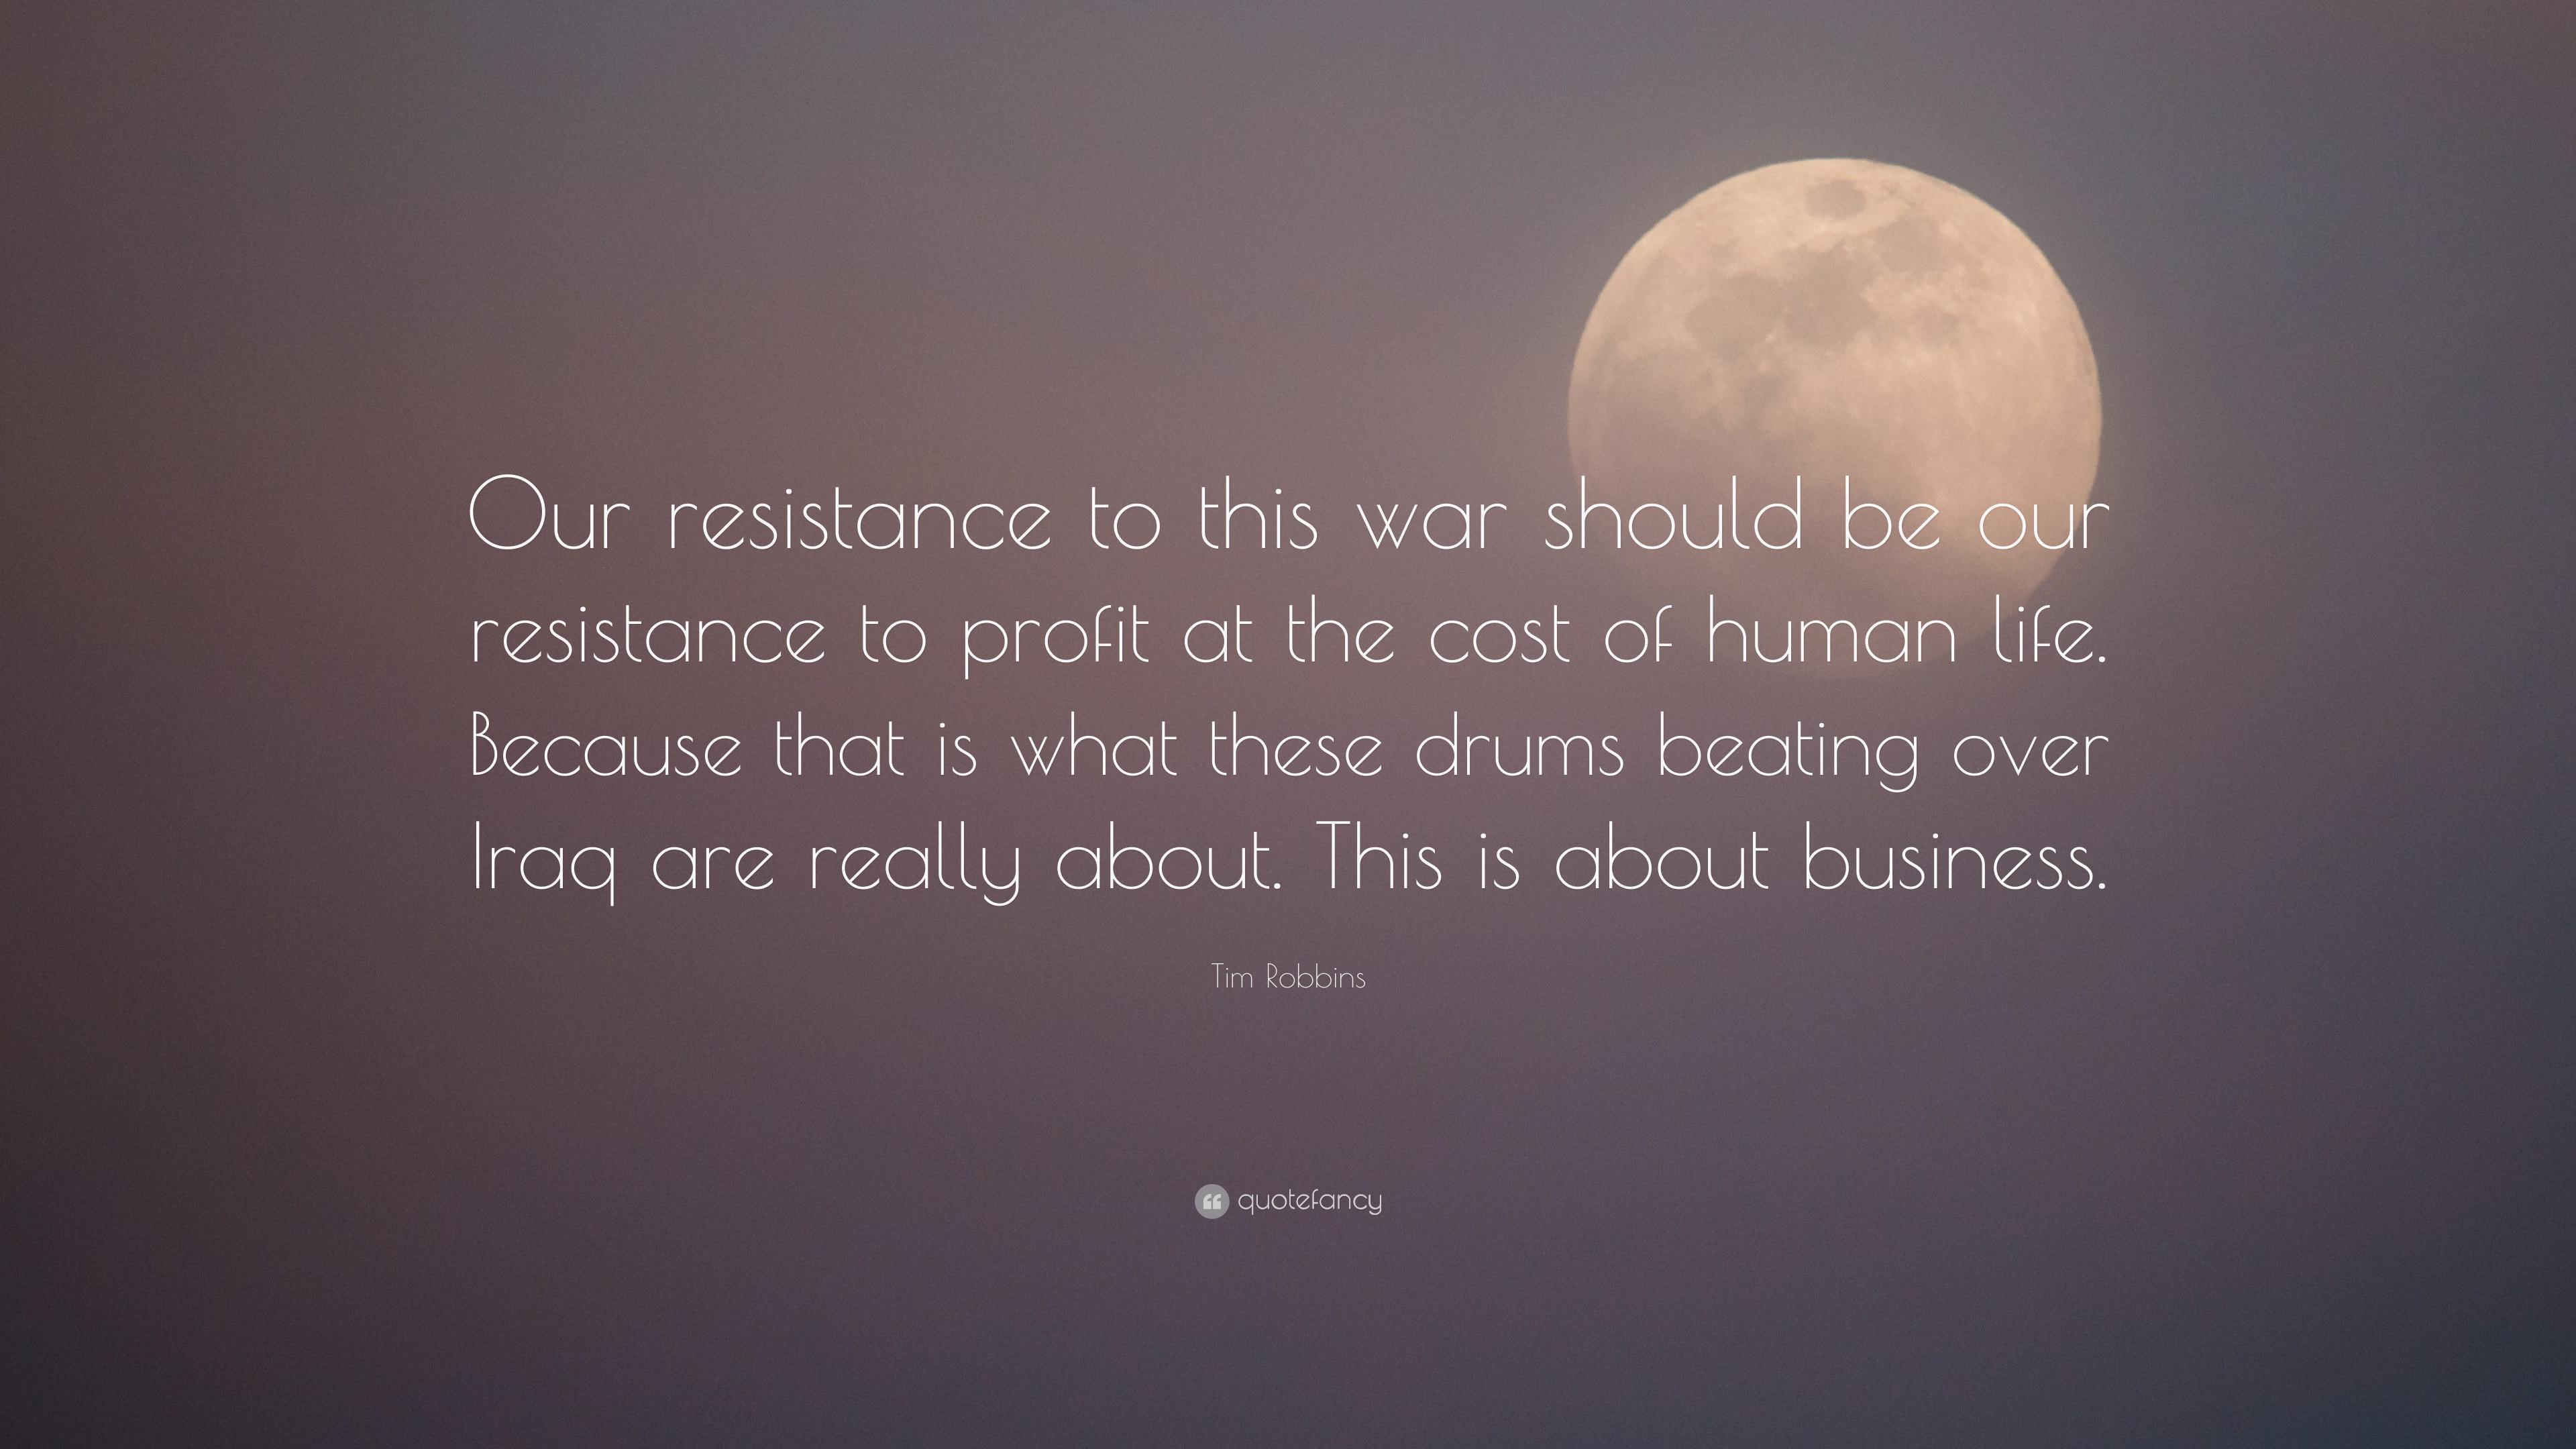 Tim Robbins Quote: “Our resistance to this war should be our